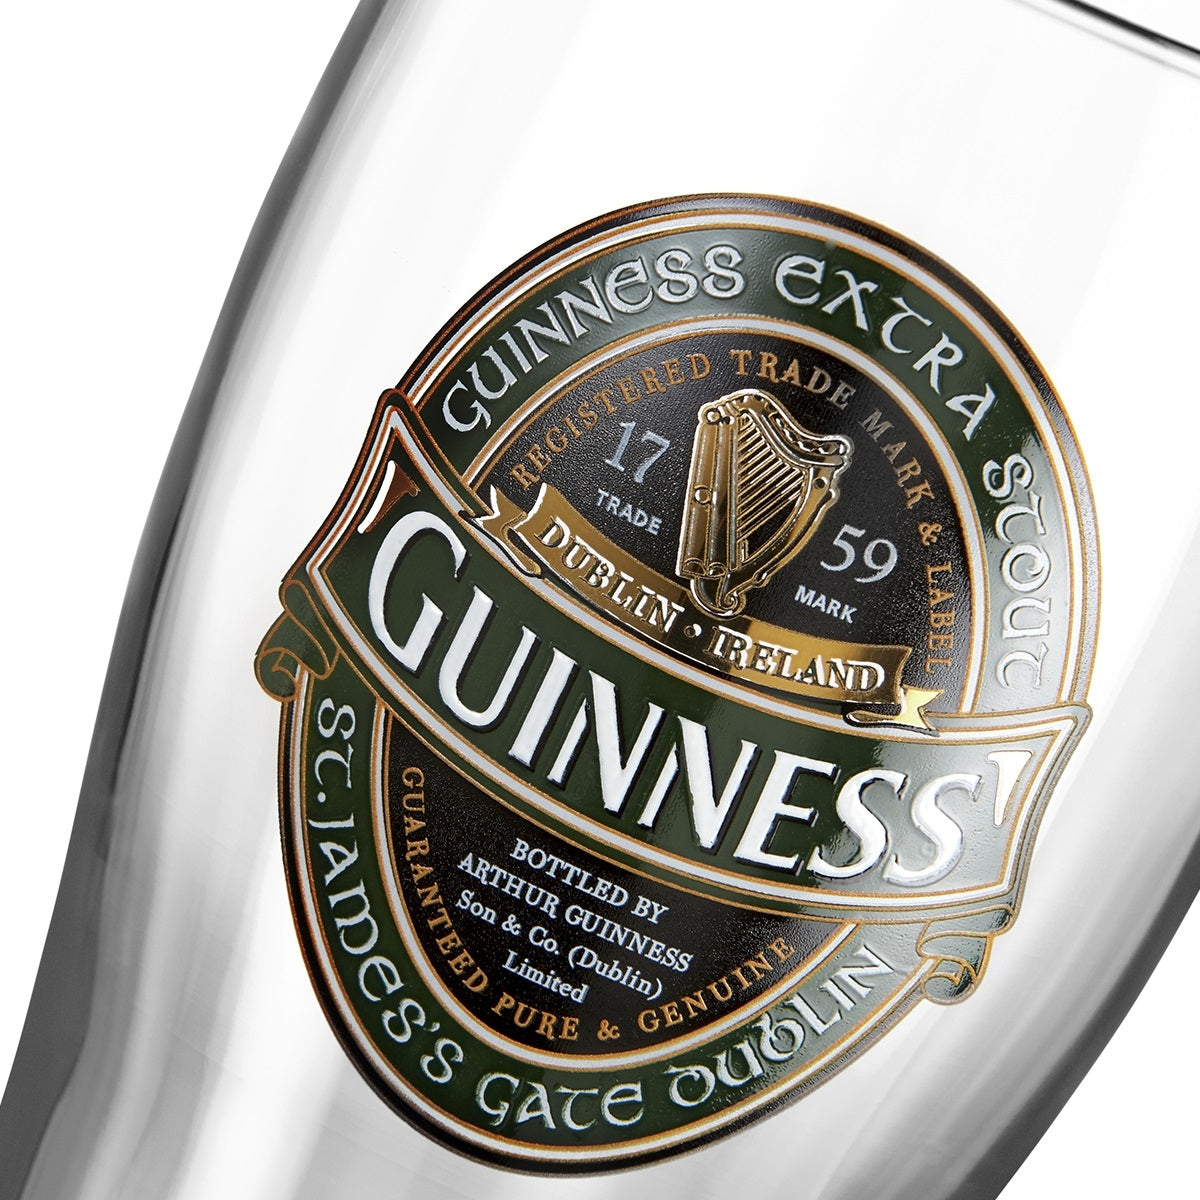 Guinness Ireland Collection Pint Glass 24 Pack